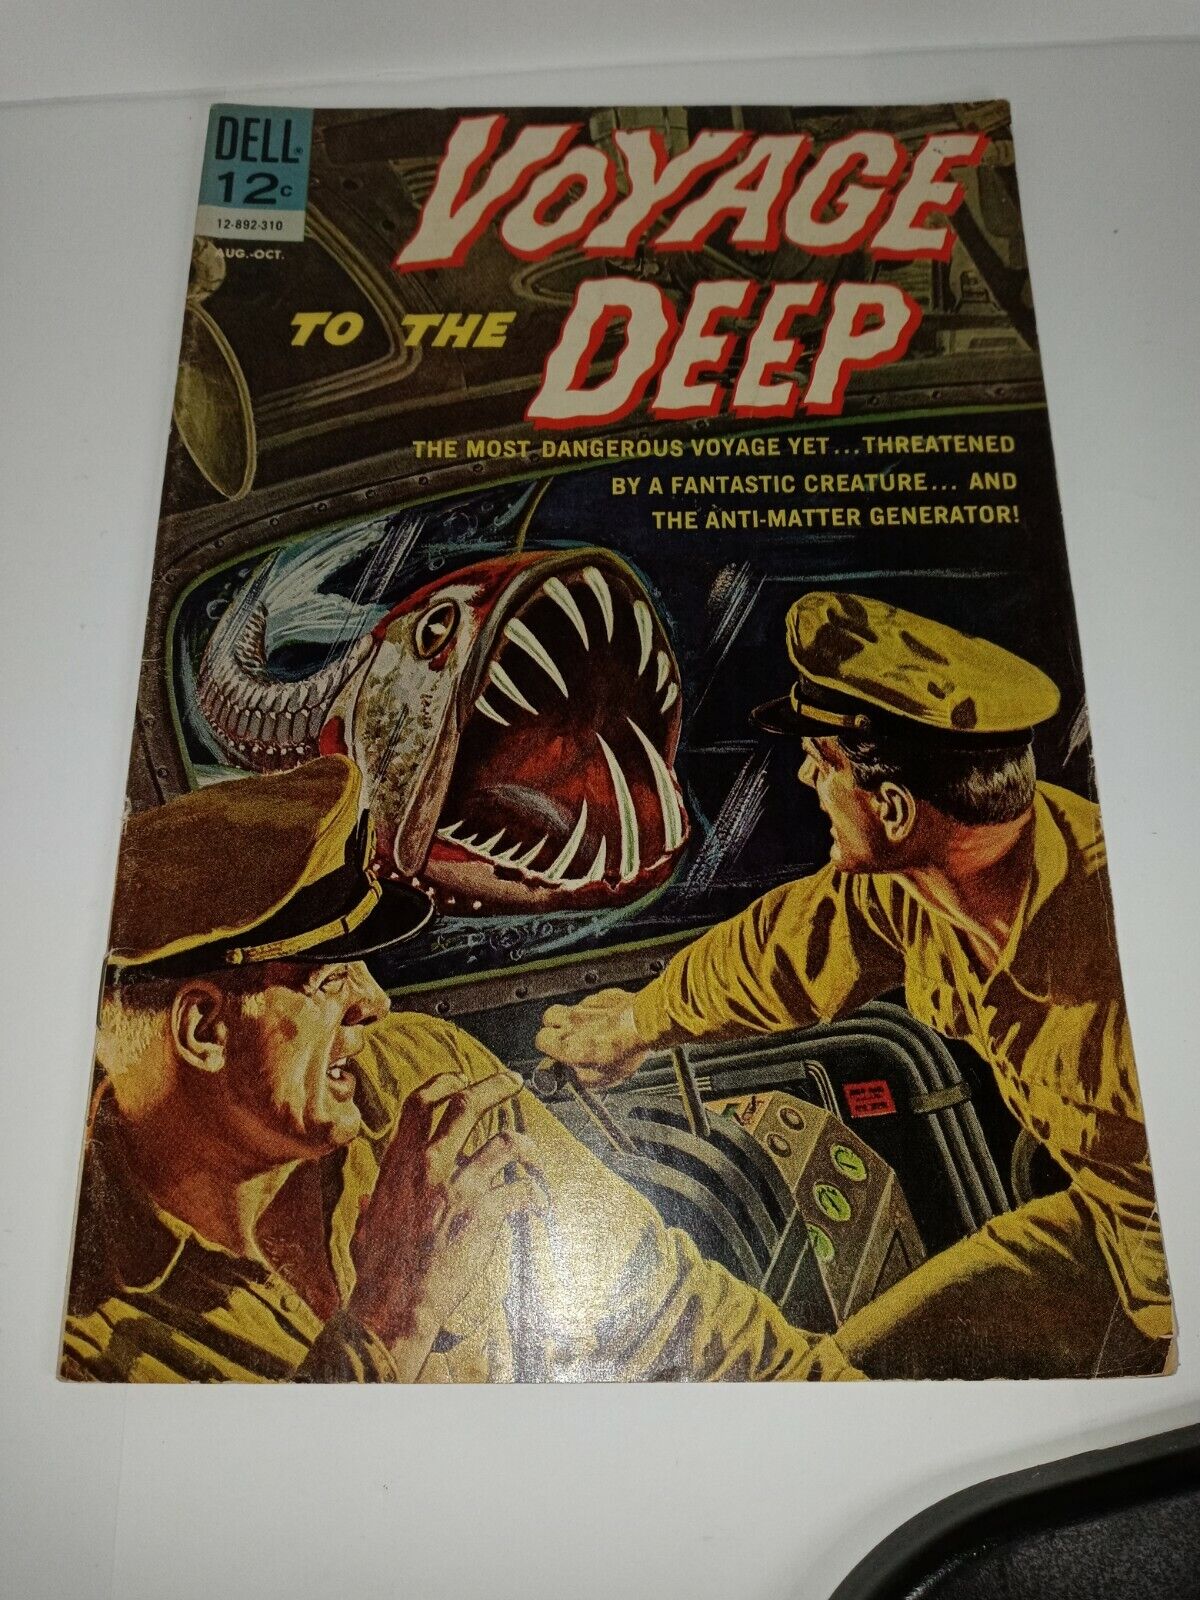 VOYAGE TO THE DEEP no. 3 Dell Oct. 1963  Submarine Painted Cover